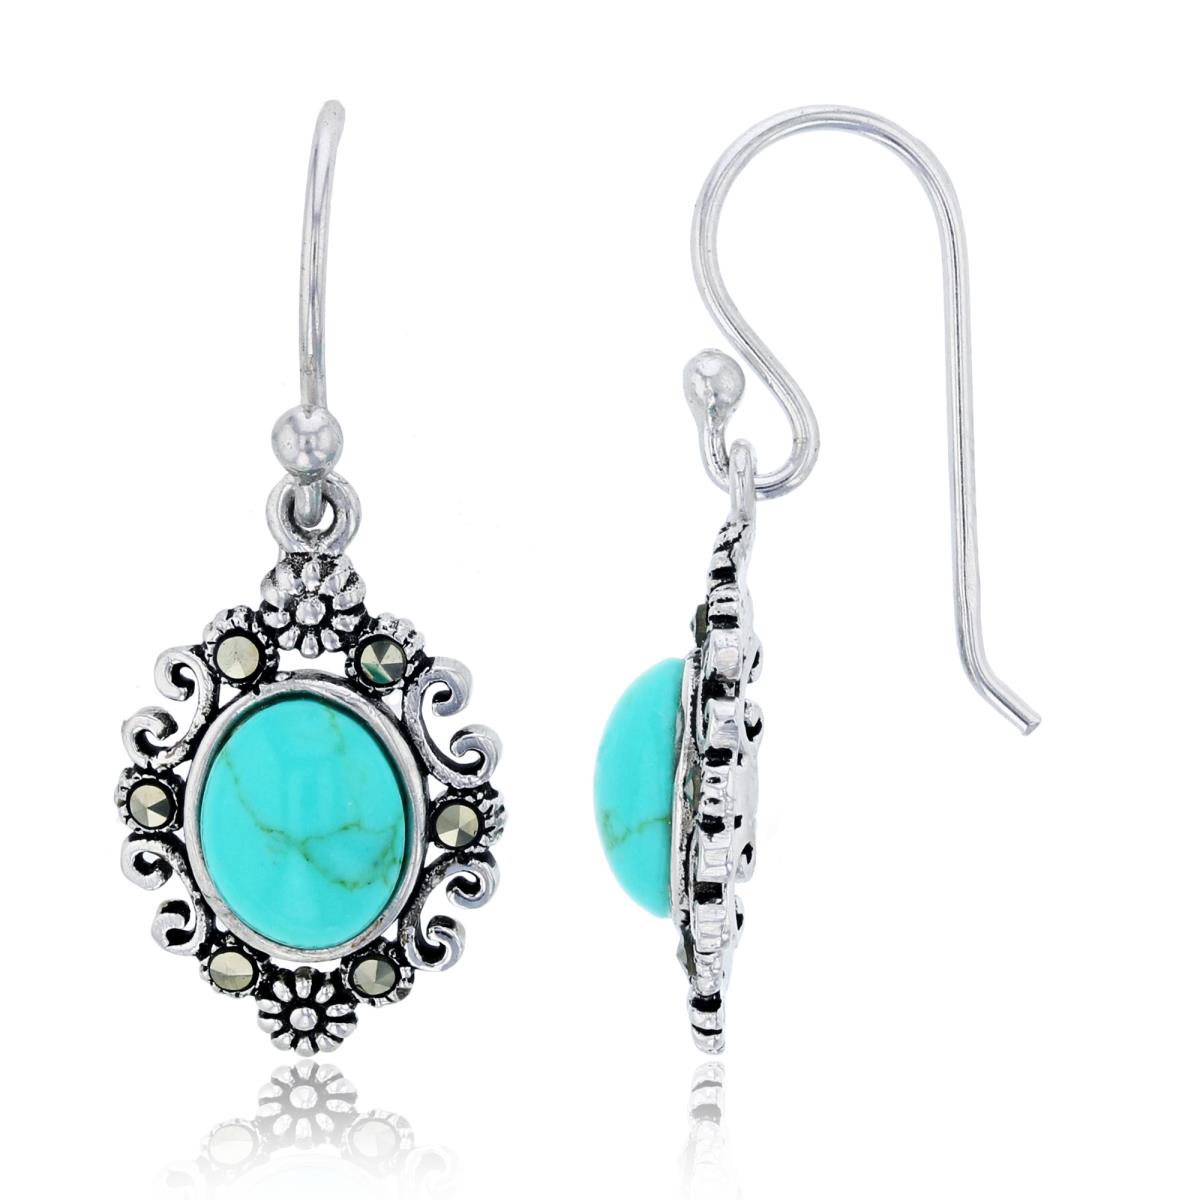 Sterling Silver Oxidized 7.5x5.5mm Oval Cut Turquoise & Rd Cut Marcasite Filigree Frame Dangling Earring